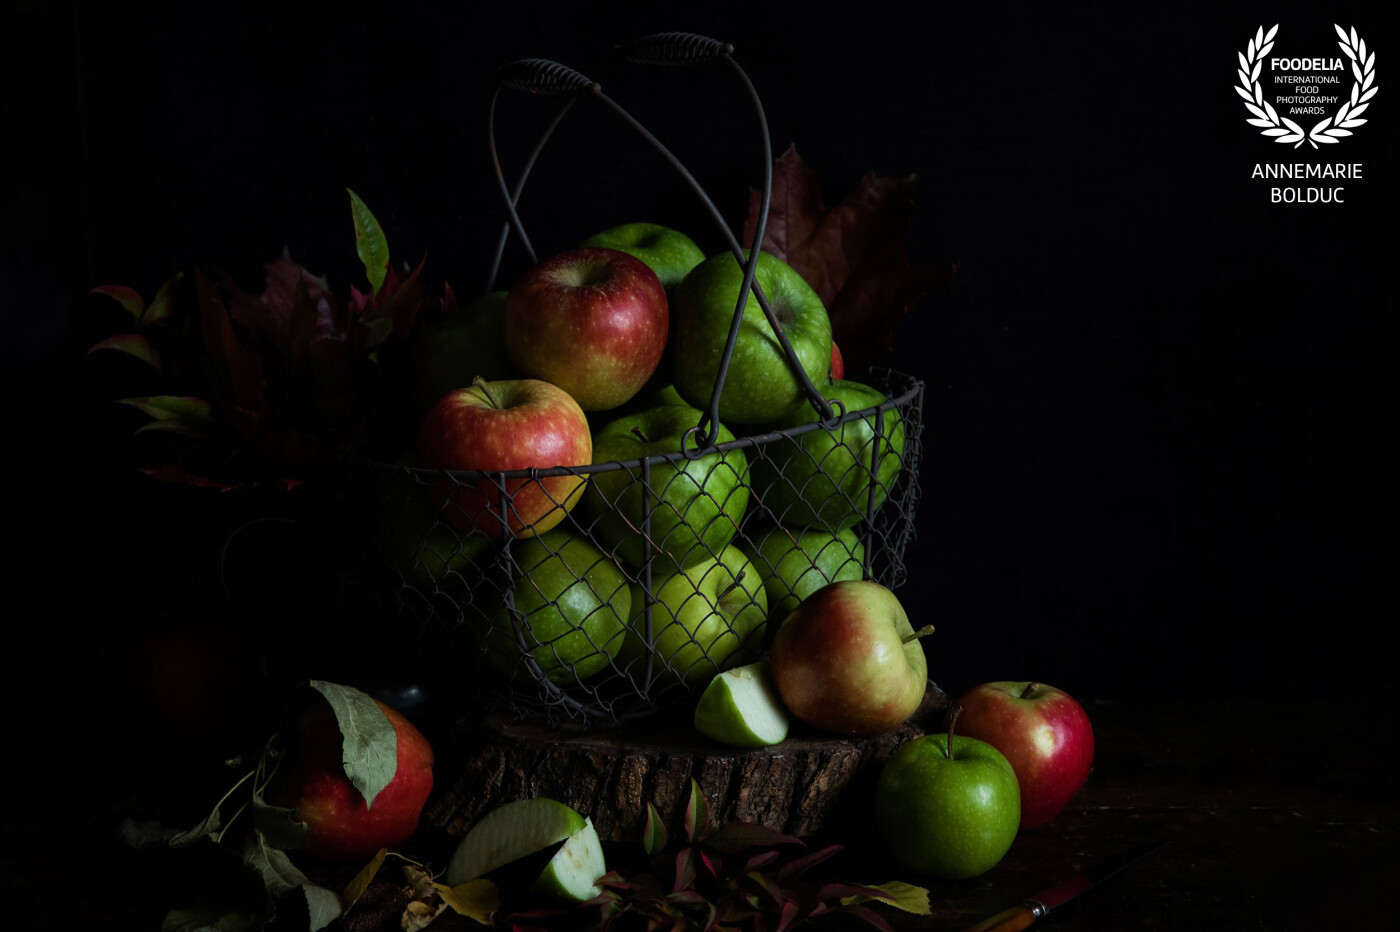 A basket of fresh apples straight from the orchard, in "clair-osbcure". The bushfire that devastated this apple-growing region revealed the true colours of many things through the darkness. This one is for Batlow.